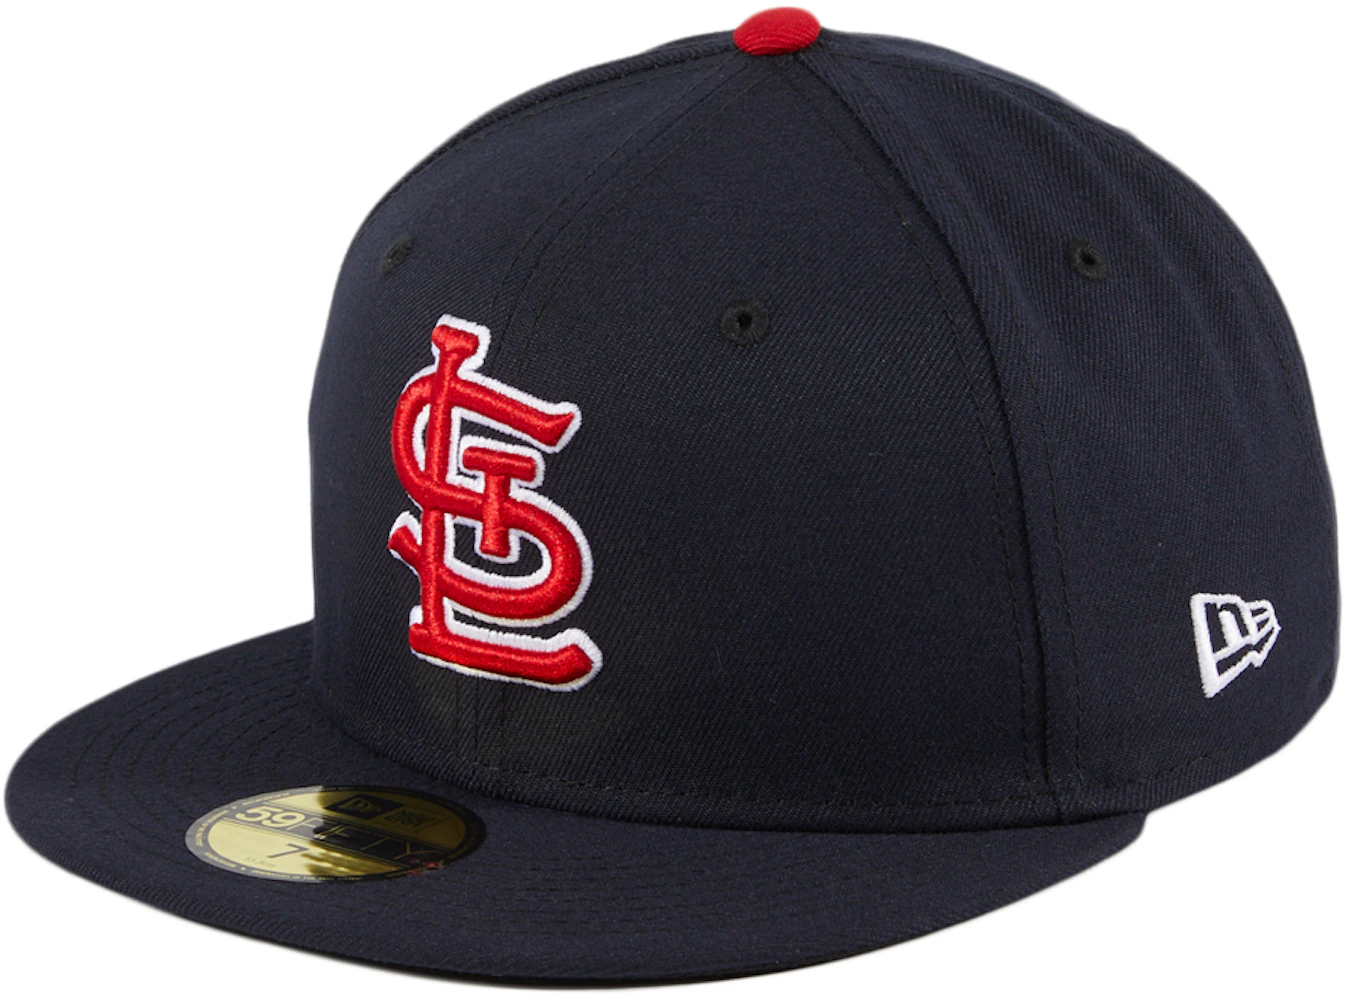 New Era St. Louis Cardinals On-Field Alternate 2 Authentic Collection 59FIFTY Fitted Hat Navy